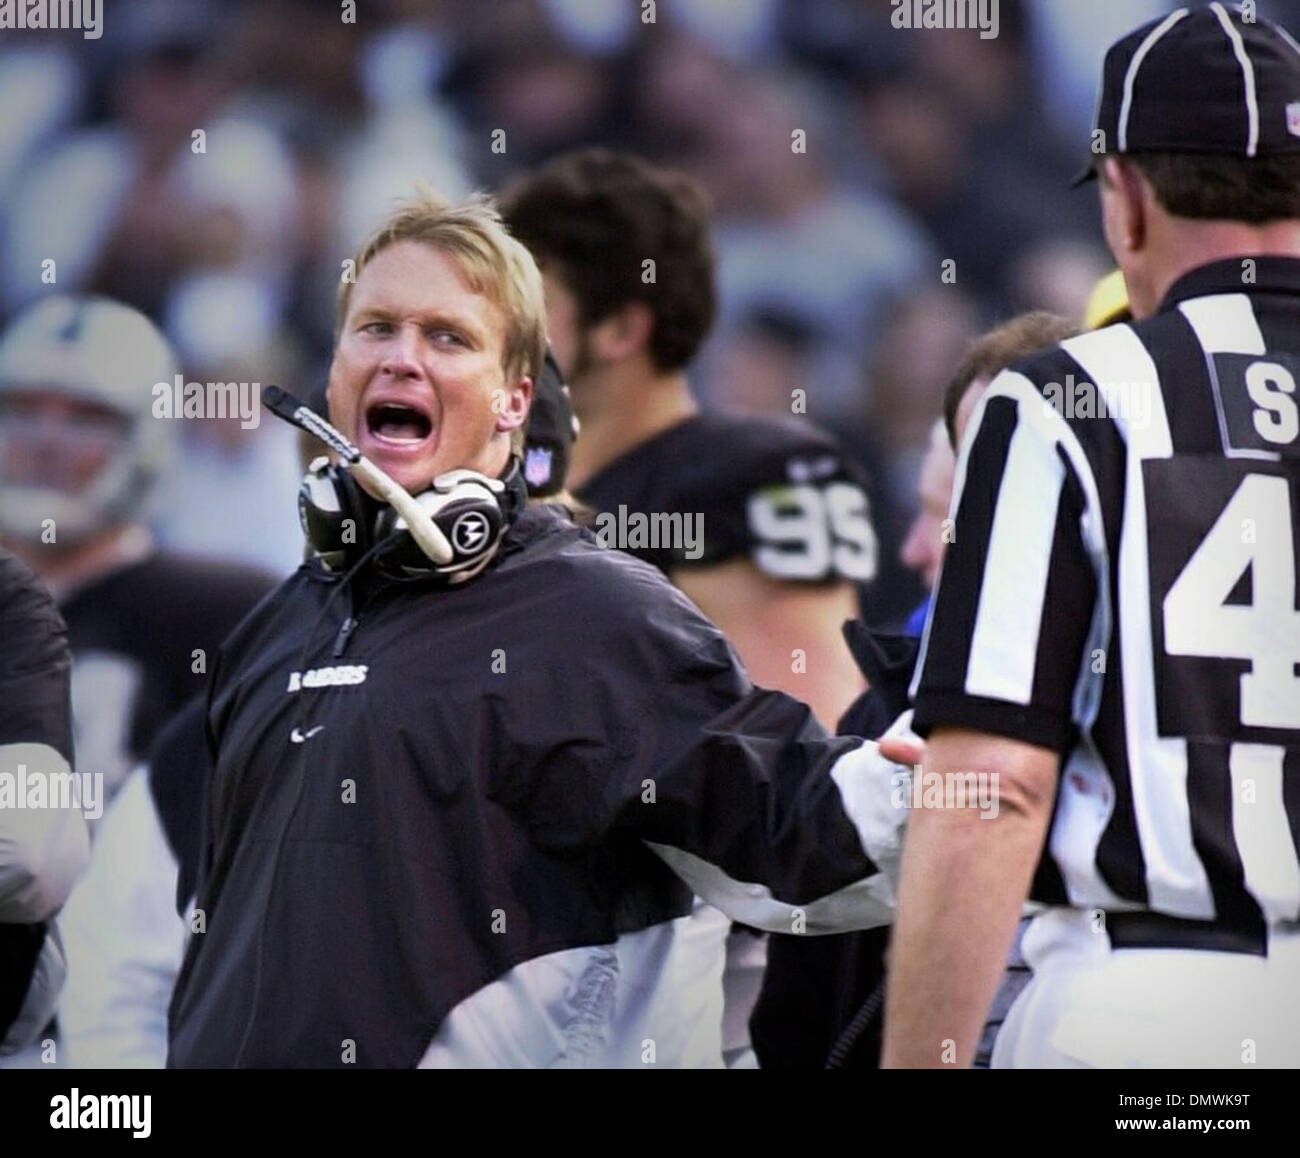 Dec 06, 2001; Oakland, CA, USA; Raider head coach Jon Gruden screams his displeasure at side judge Tom Fincken after an apparent fumble recovery for a touchdown was called back during the 3rd quarter of their Jan. 6, 2000 game against Miami in Oakland, Calif. Stock Photo